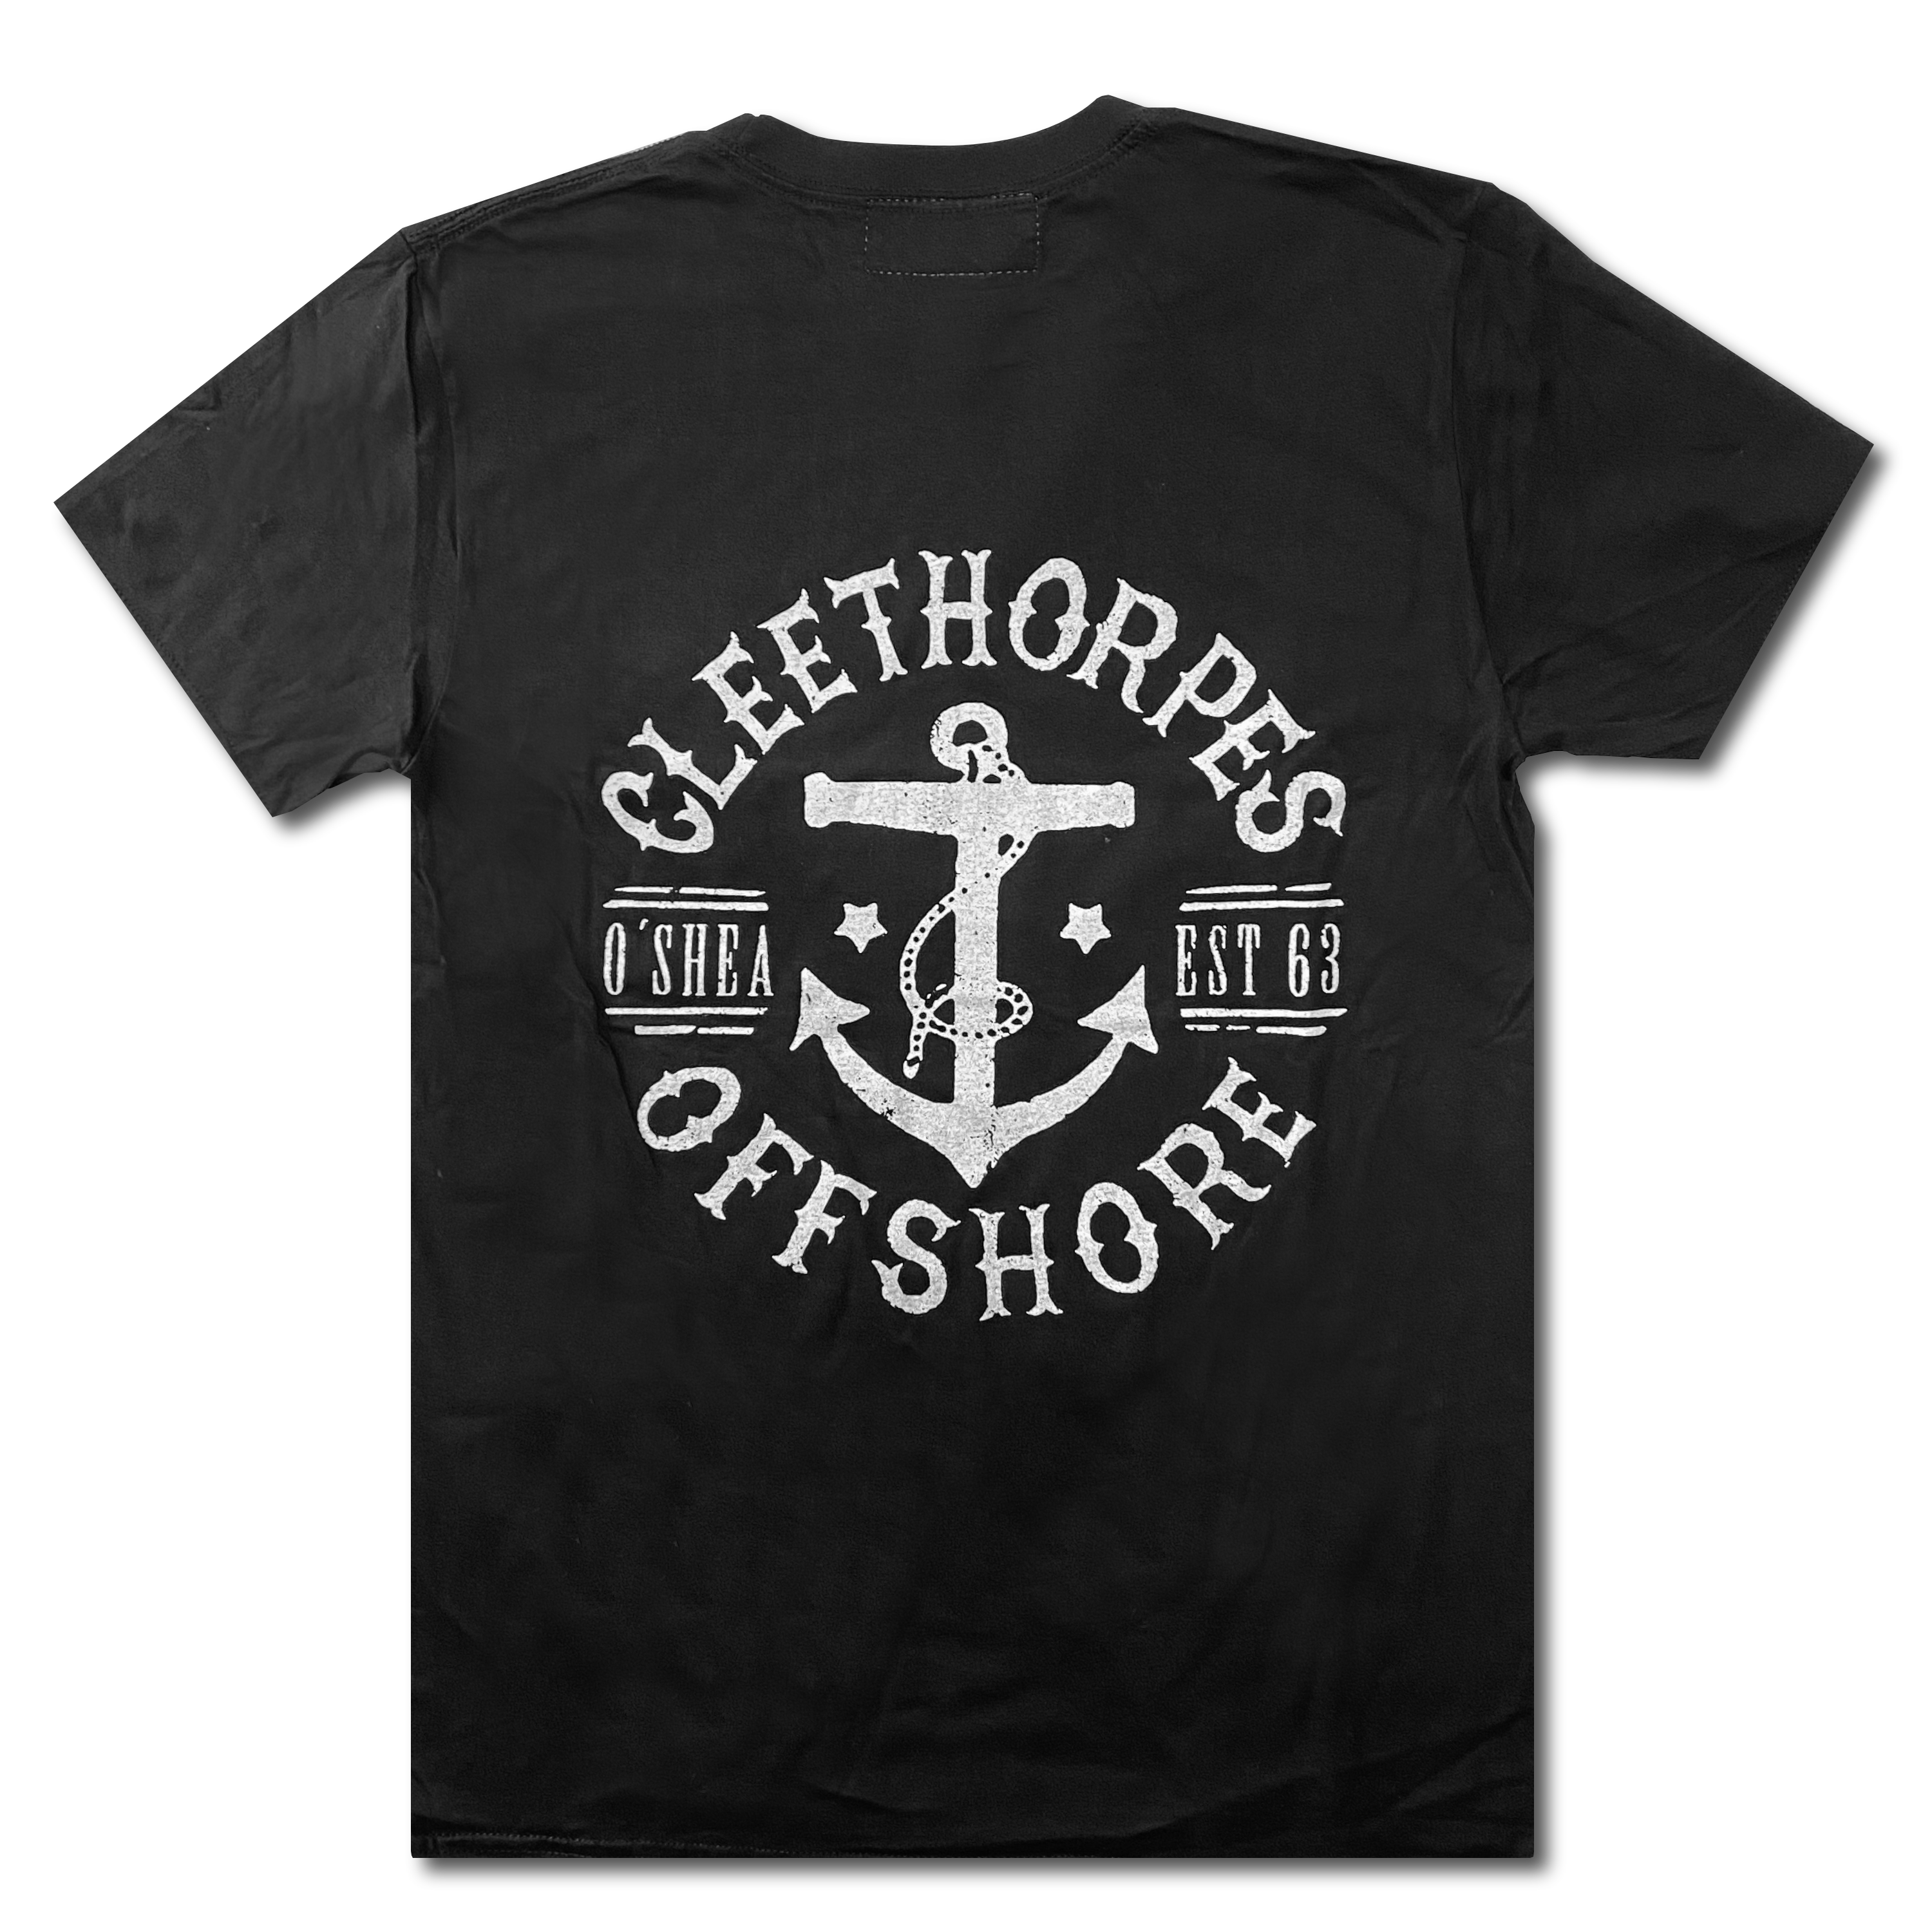 Cleethorpes "OFFSHORE" T-Shirt==BLACK ==